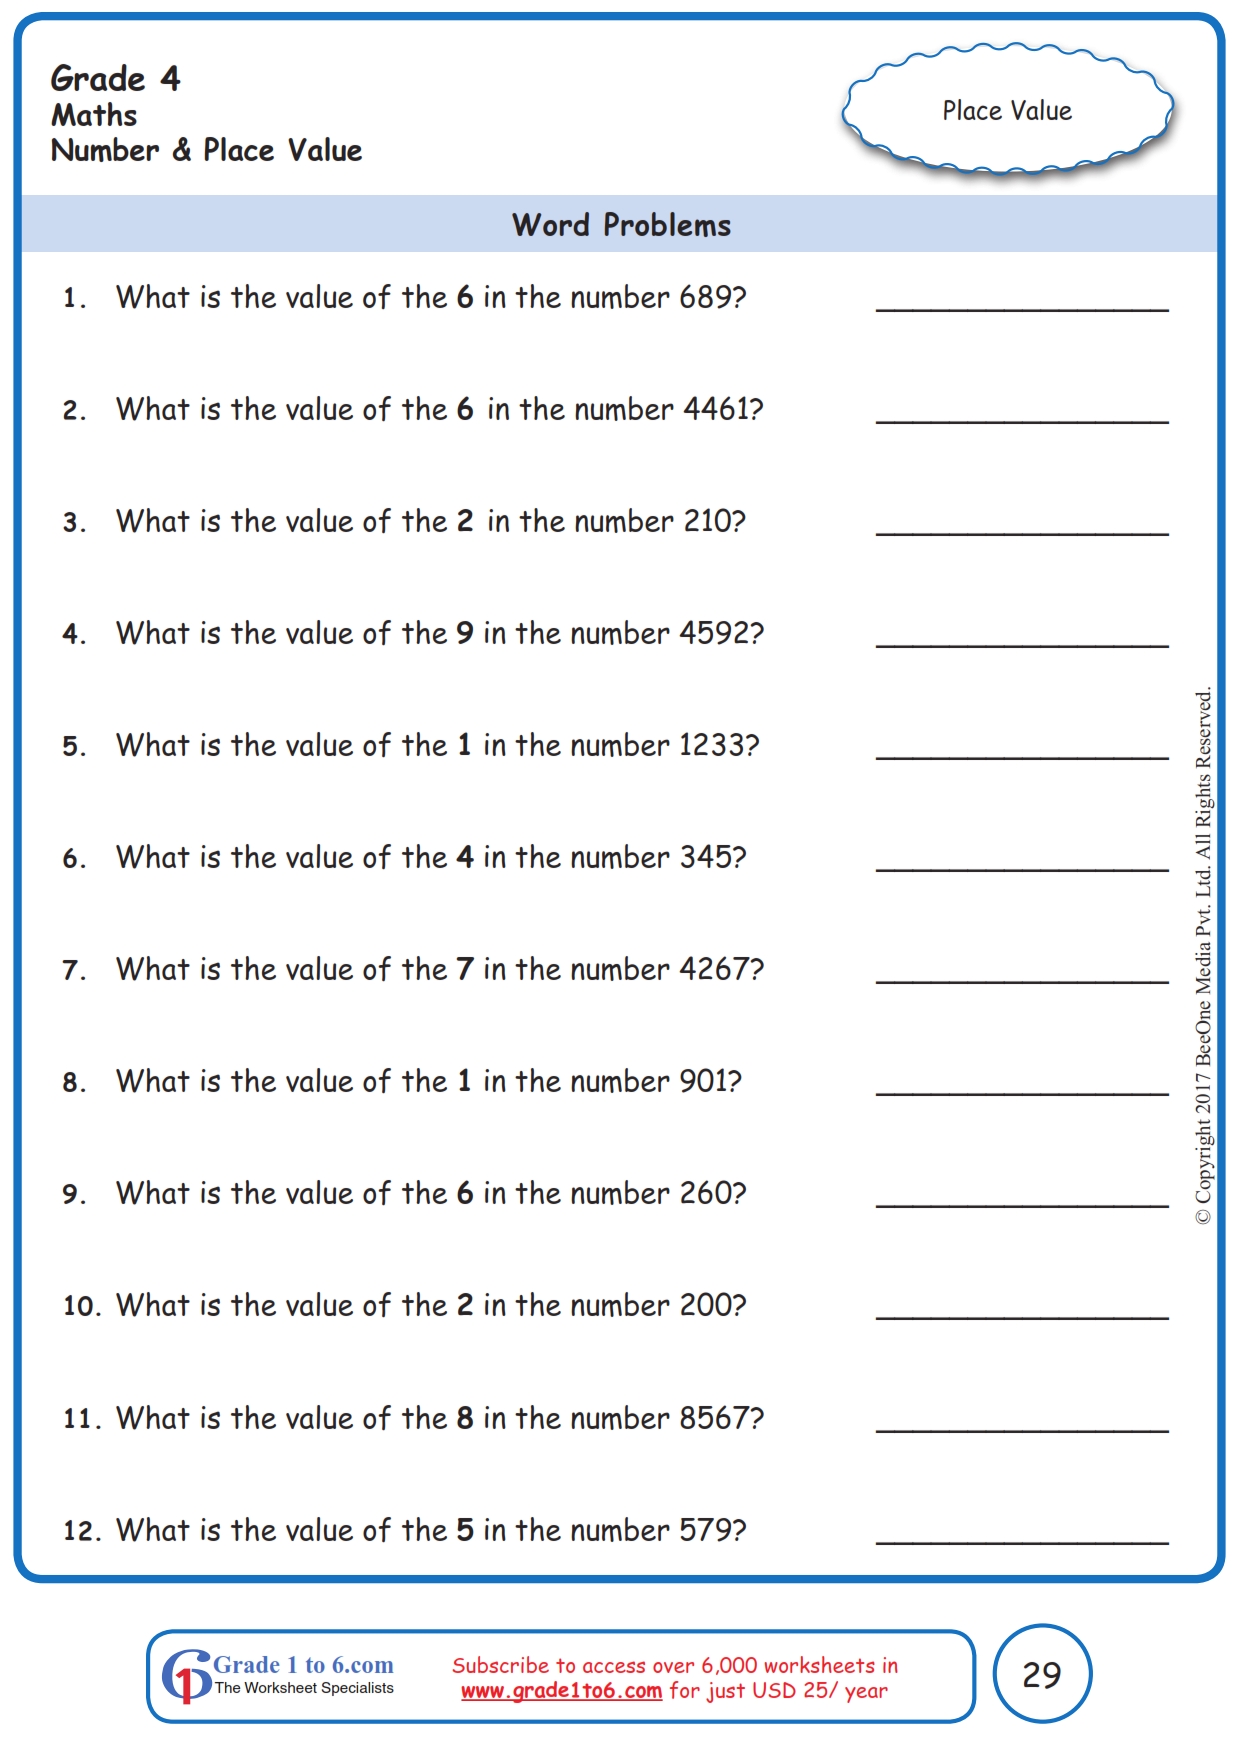 place-value-worksheet-for-rounding-tens-and-hundreds-to-the-nearest-tens-with-numbers